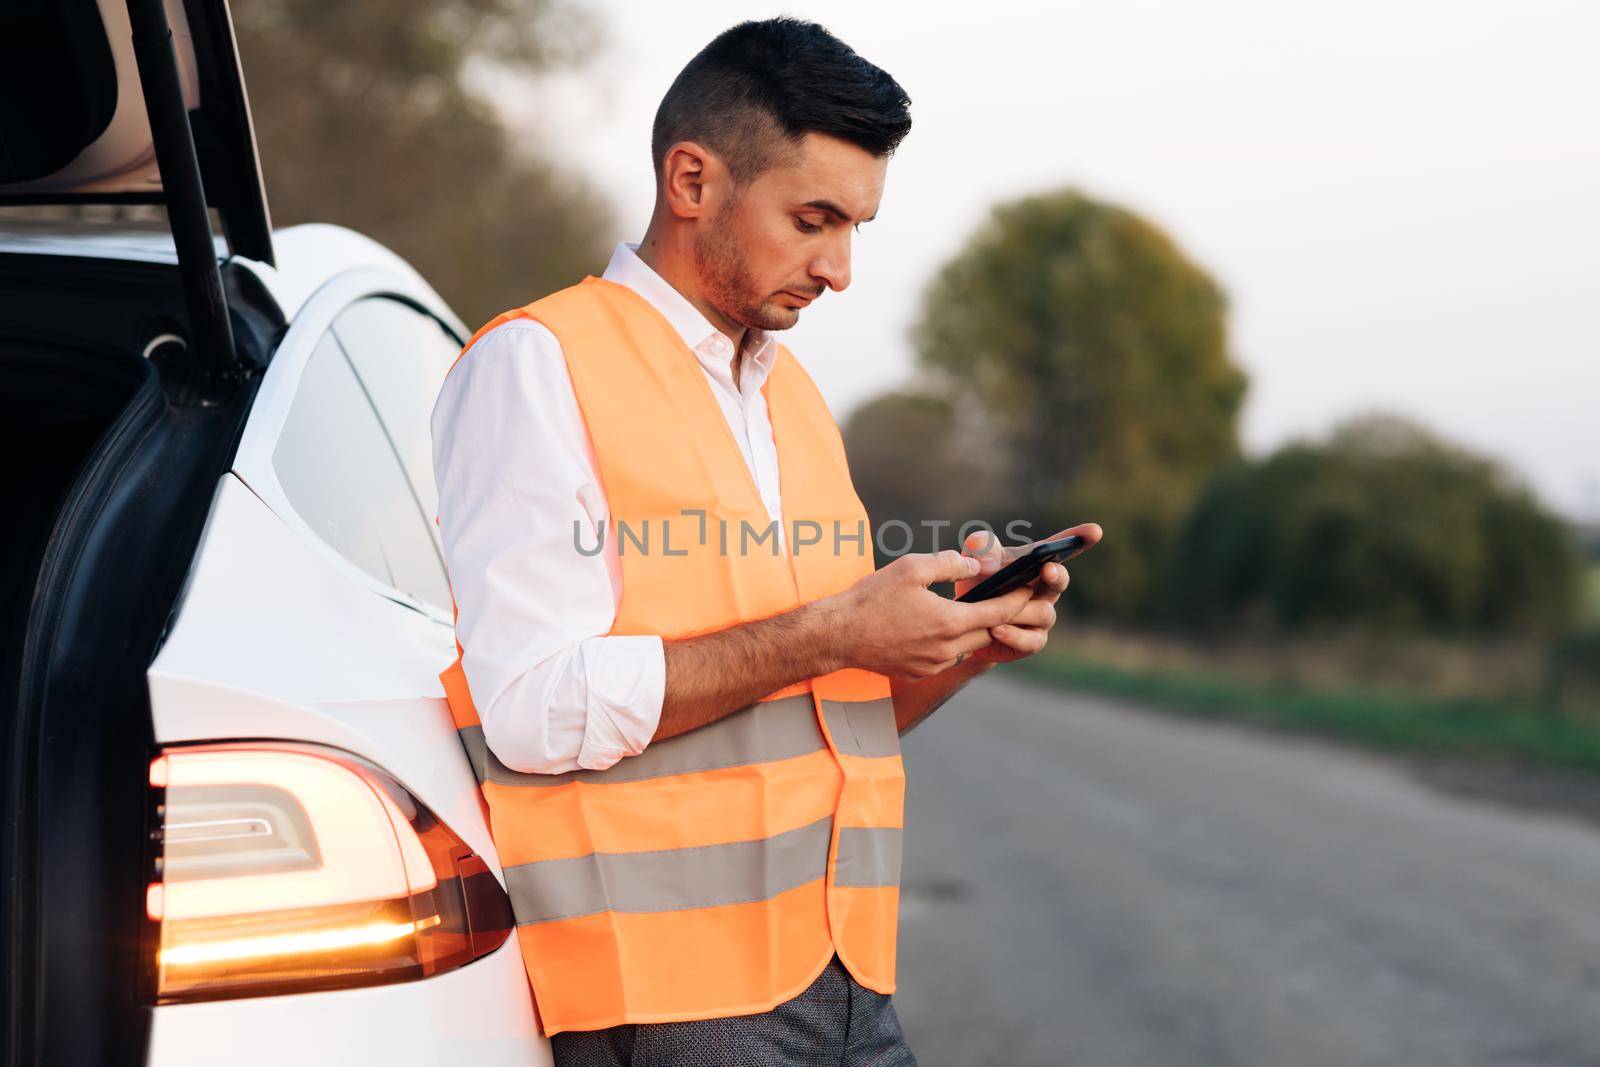 Sad Disappointed Man On Broken Electric Car. Vehicle Check Damage Troubles. Discharged electric car. Auto Failure Accident Inspection by uflypro